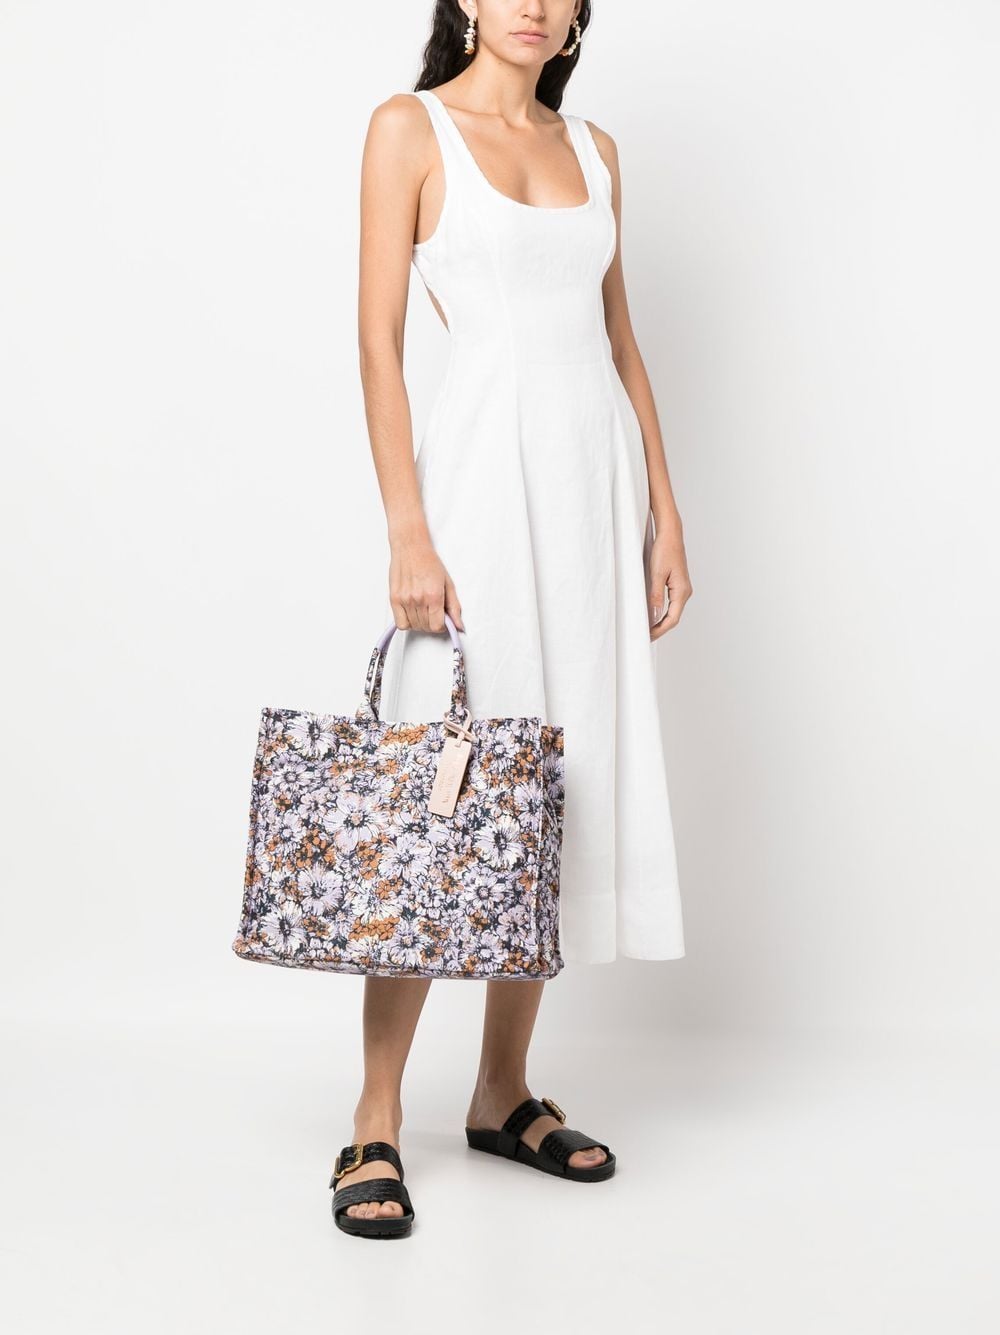 Coccinelle Never Without floral-print Tote Bag - Farfetch